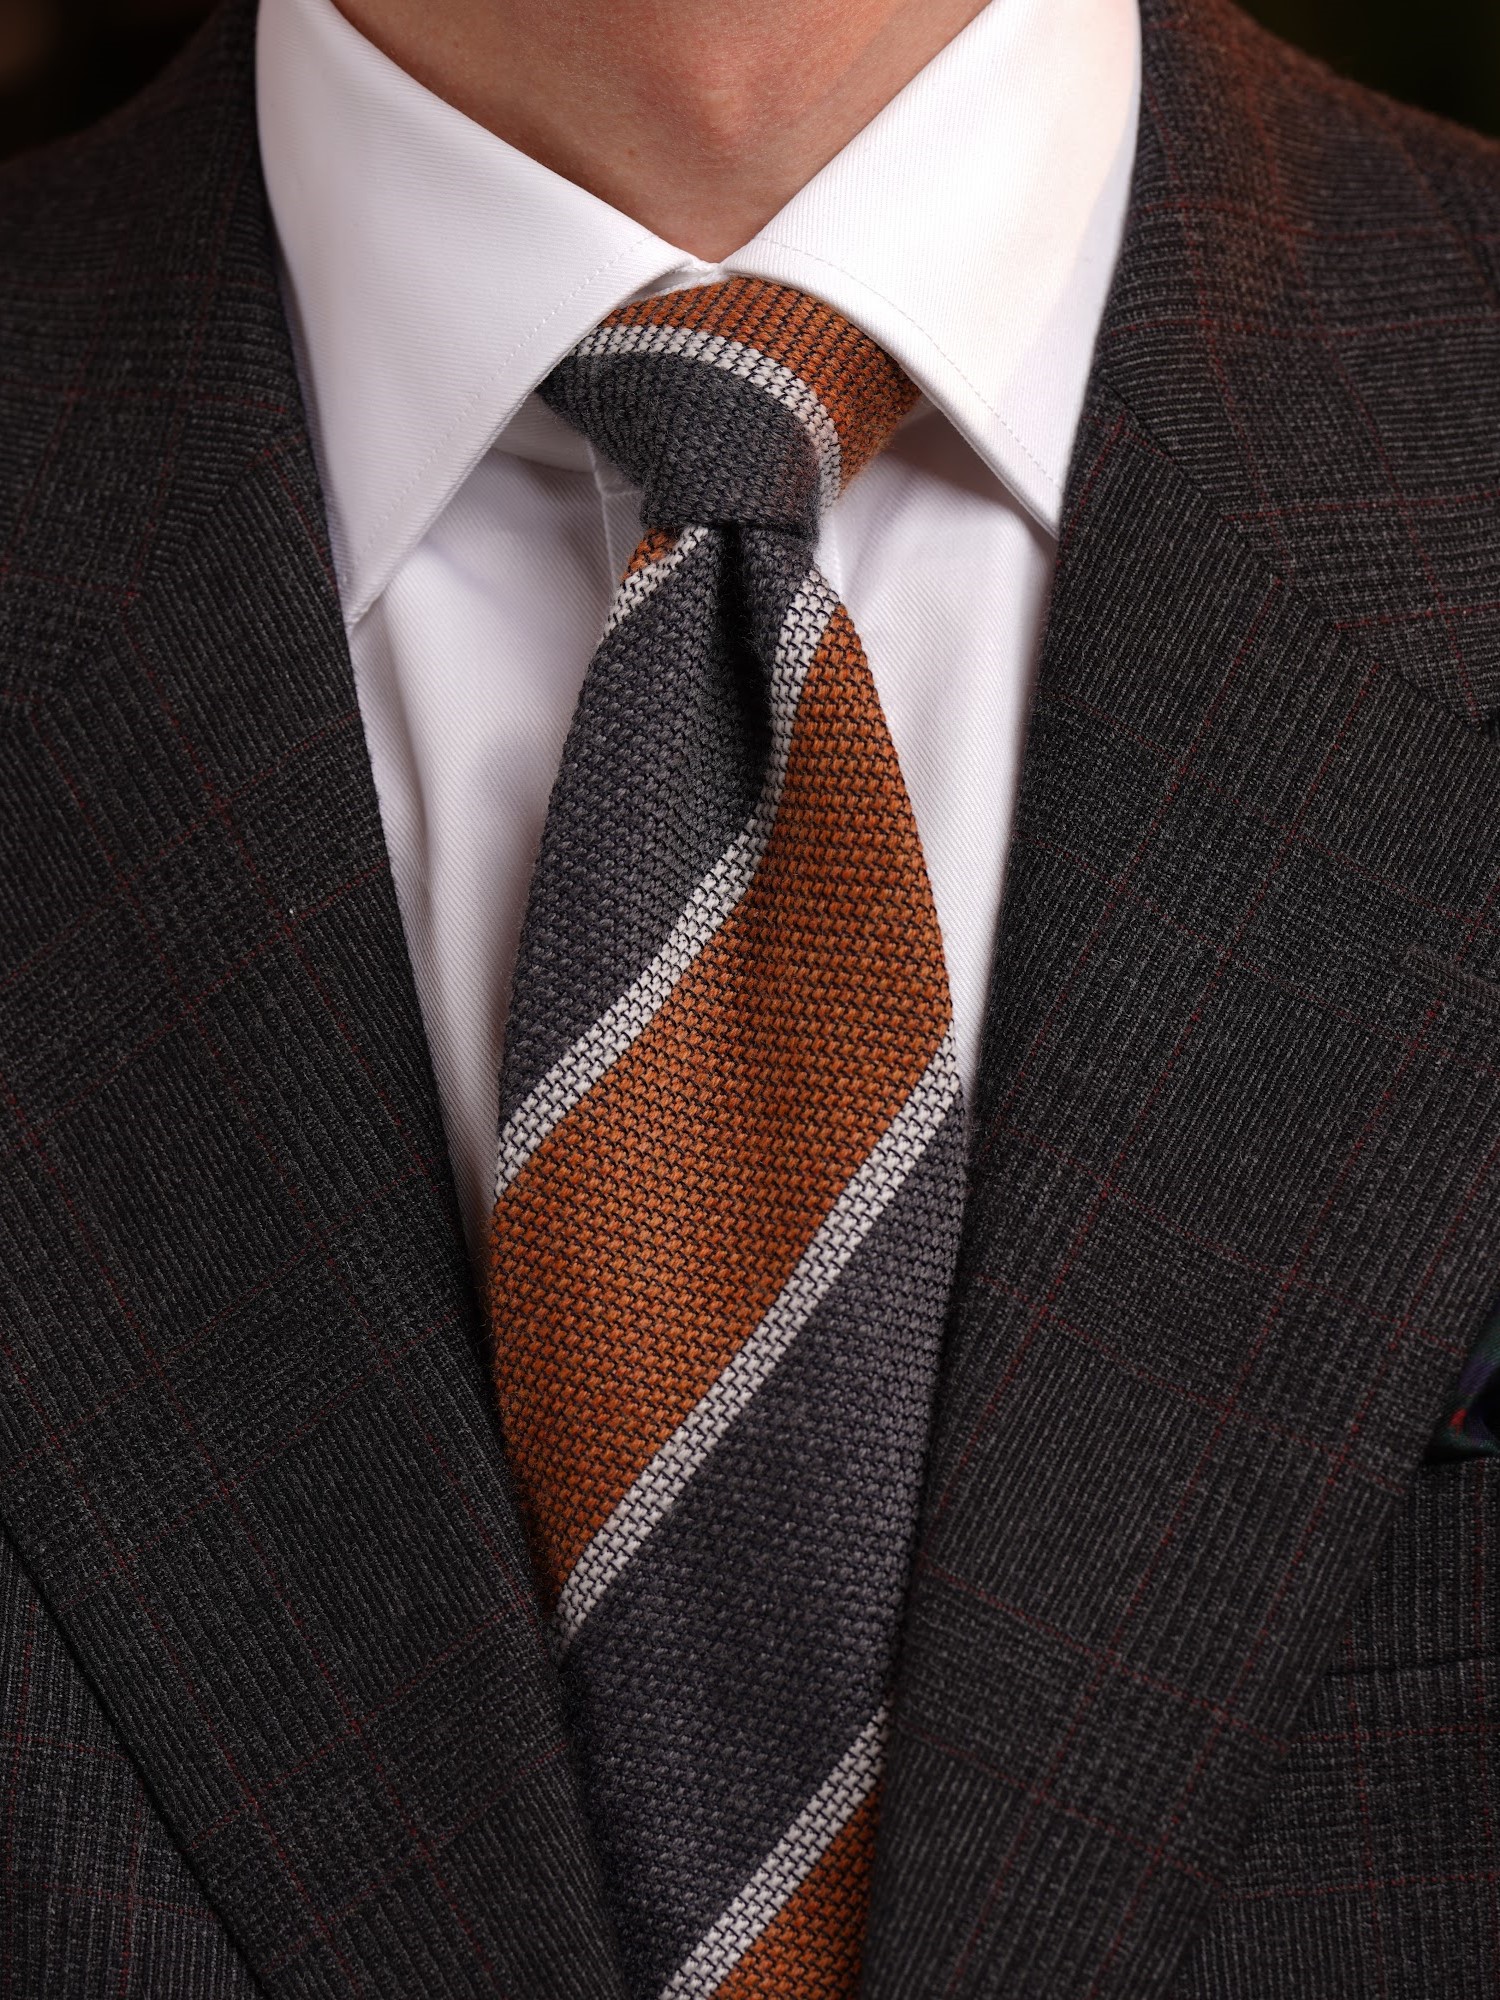 The Half Windsor Knot is somewhere between the Four In Hand and Full Windsor styles